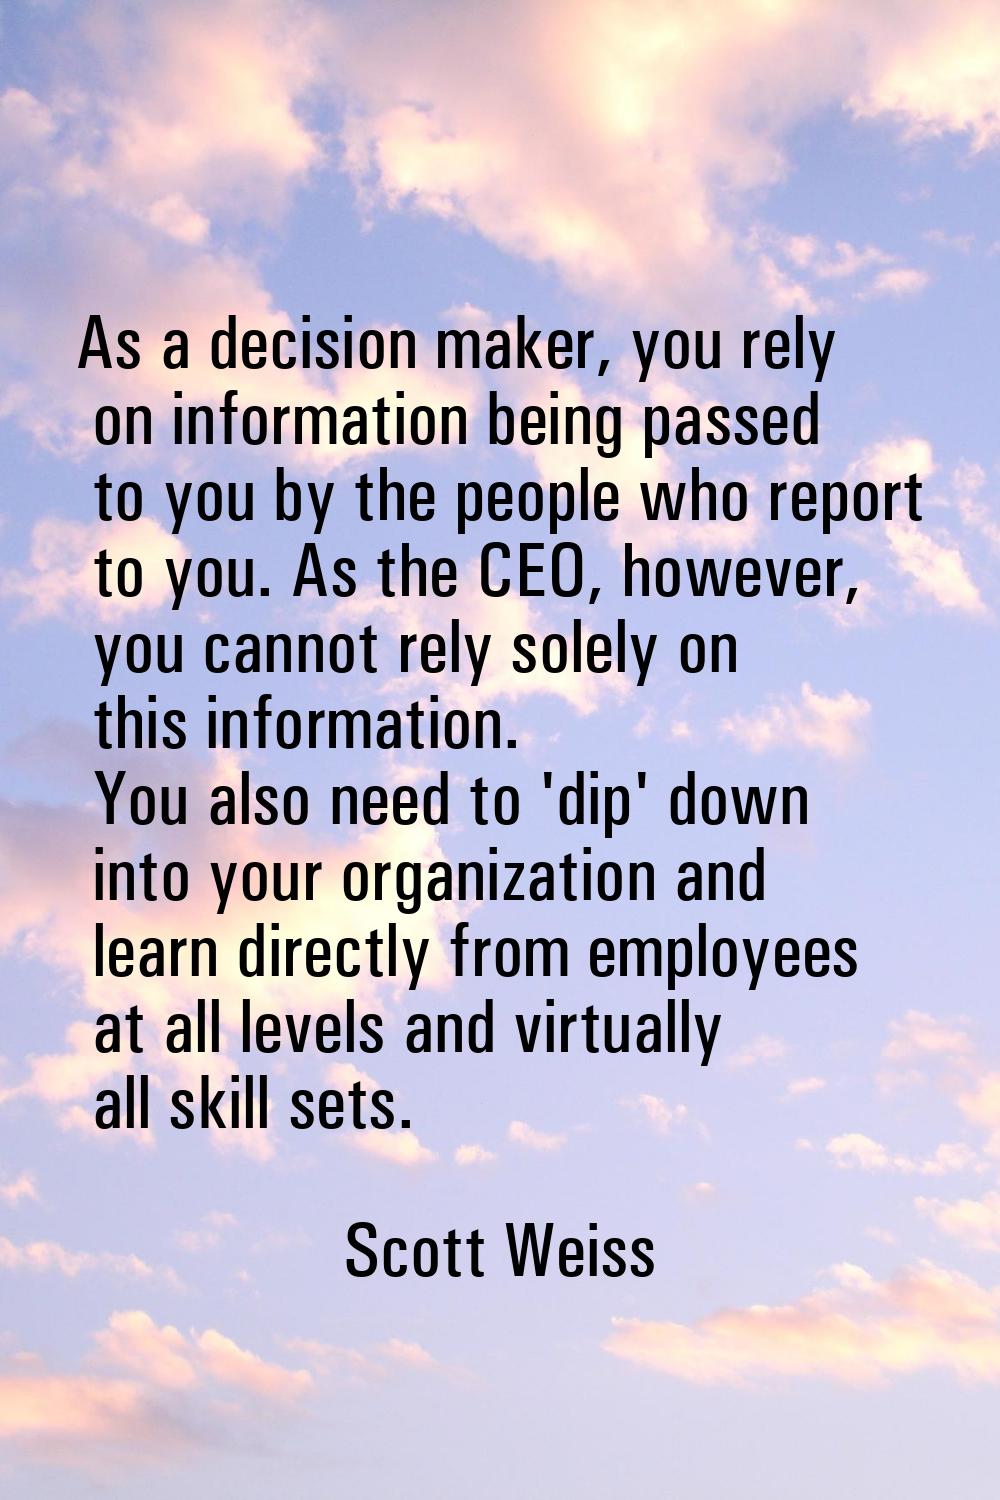 As a decision maker, you rely on information being passed to you by the people who report to you. A